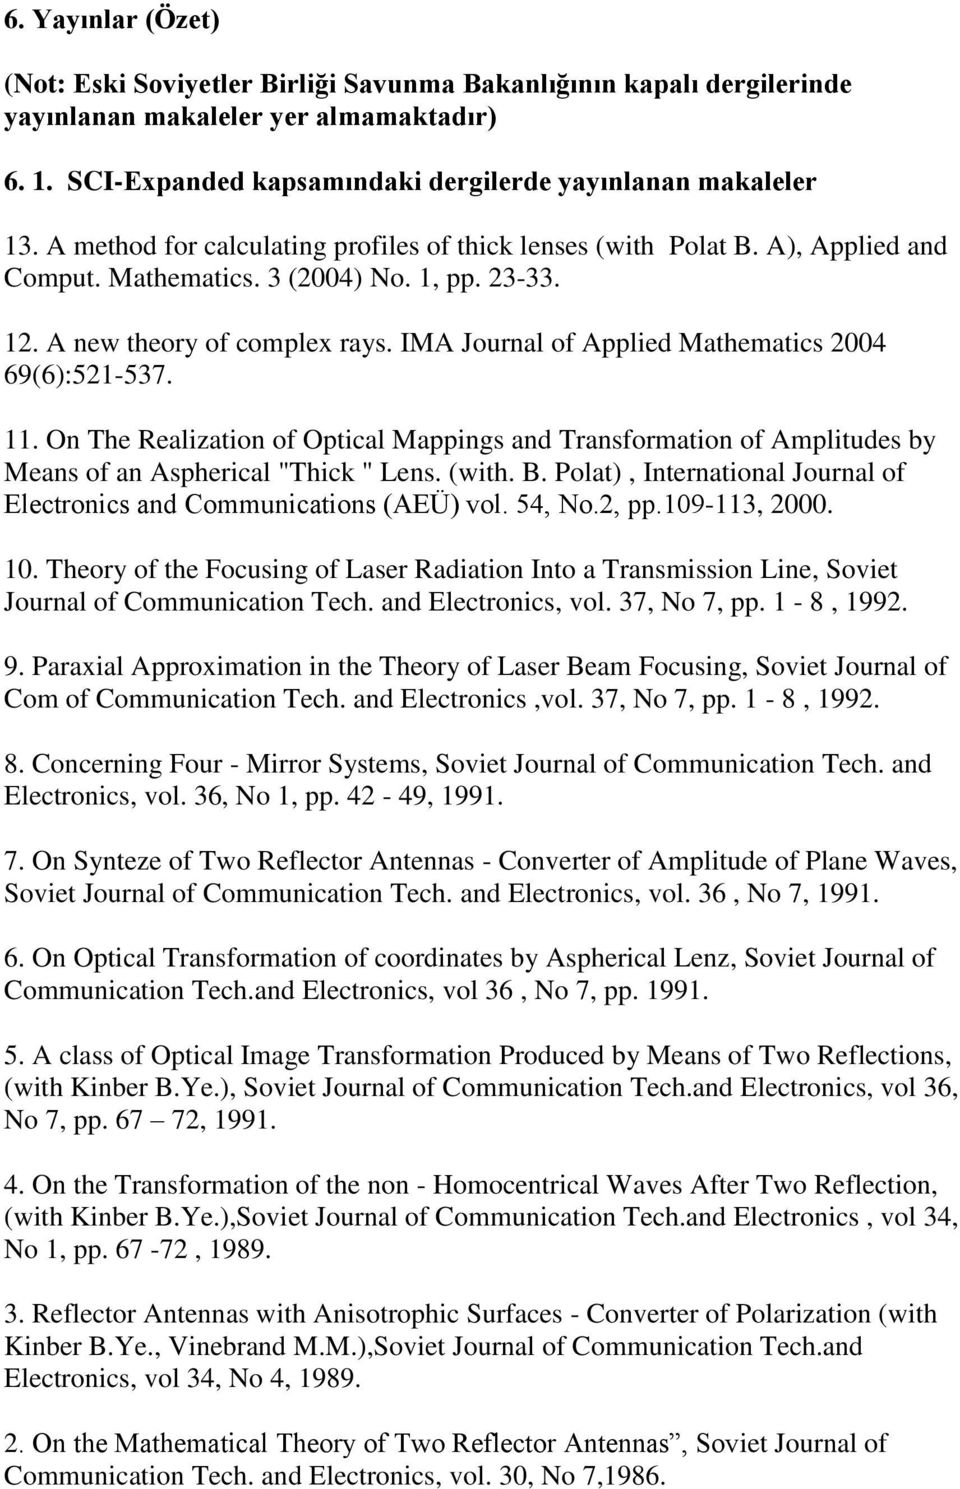 IMA Journal of Applied Mathematics 2004 69(6):521-537. 11. On The Realization of Optical Mappings and Transformation of Amplitudes by Means of an Aspherical "Thick " Lens. (with. B.